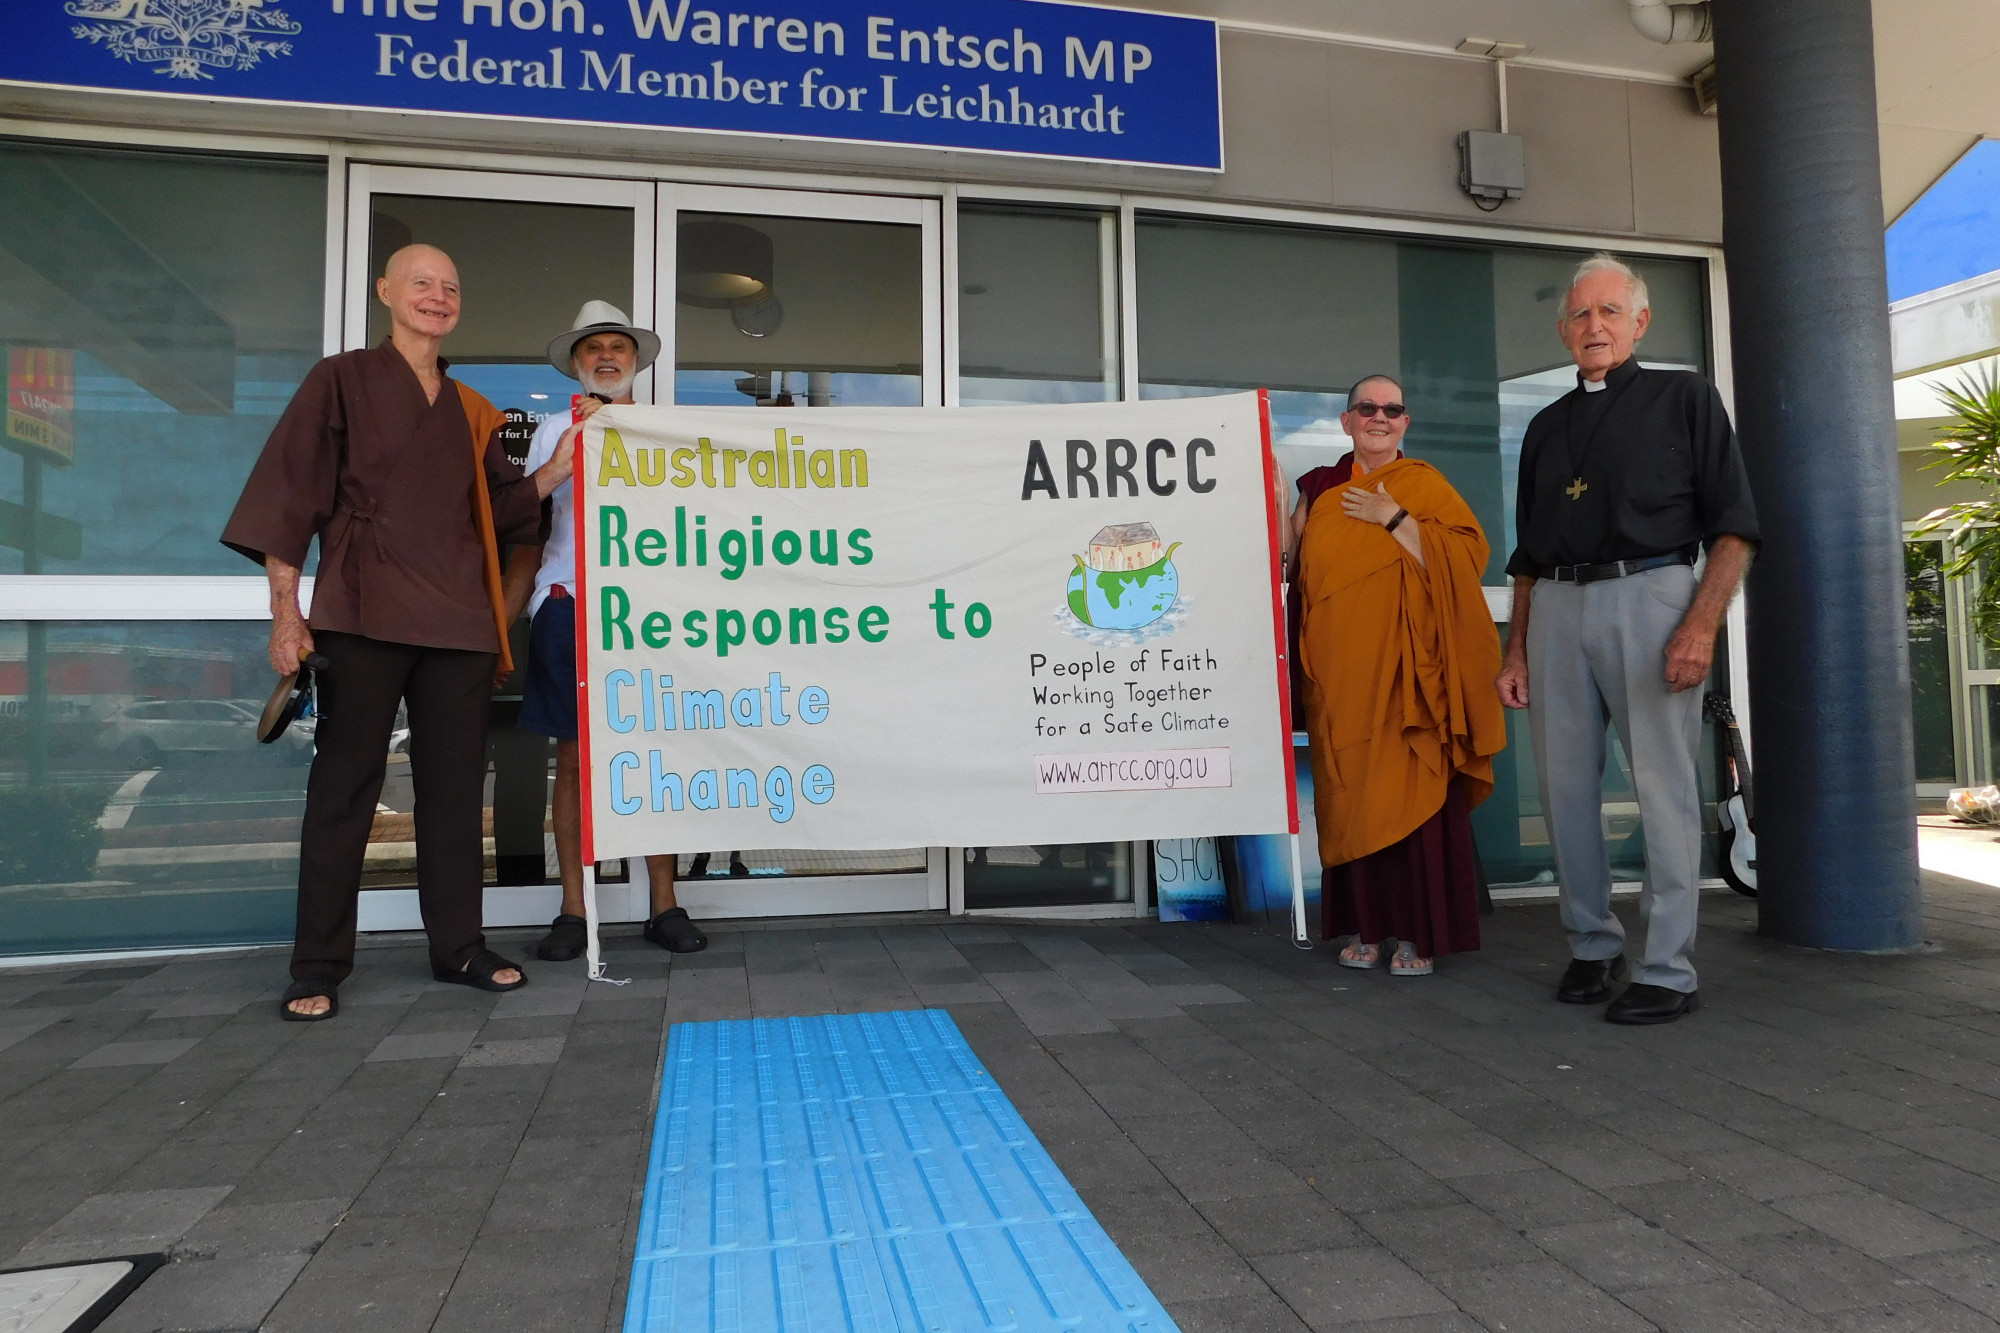 Cairns people of faith including the Khacho Yulo Ling Buddhist Center’s Venerable Rinchen, and Anglican Priest Neil Forgie (right) at Warren Entsch’s office last Thursday.